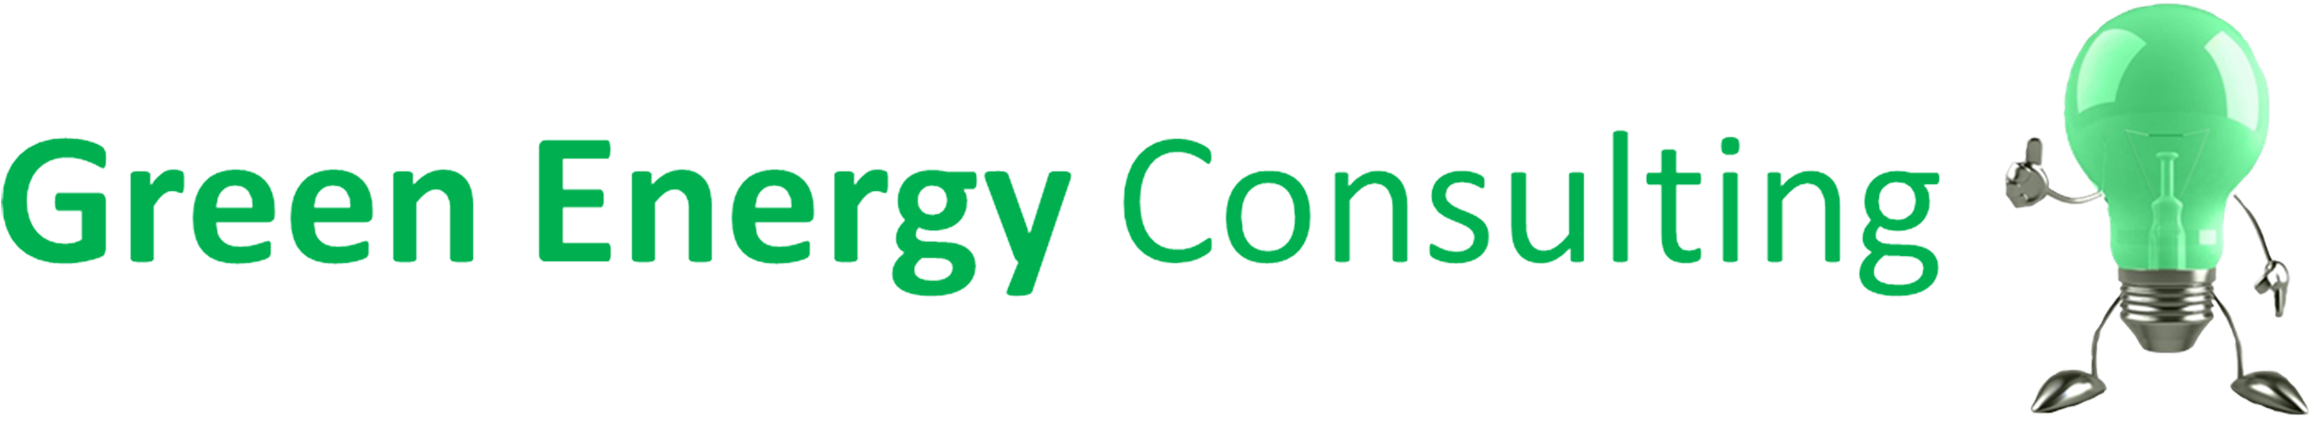 Gec Frontlogo - Green Energy Consulting Logo (2350x480), Png Download